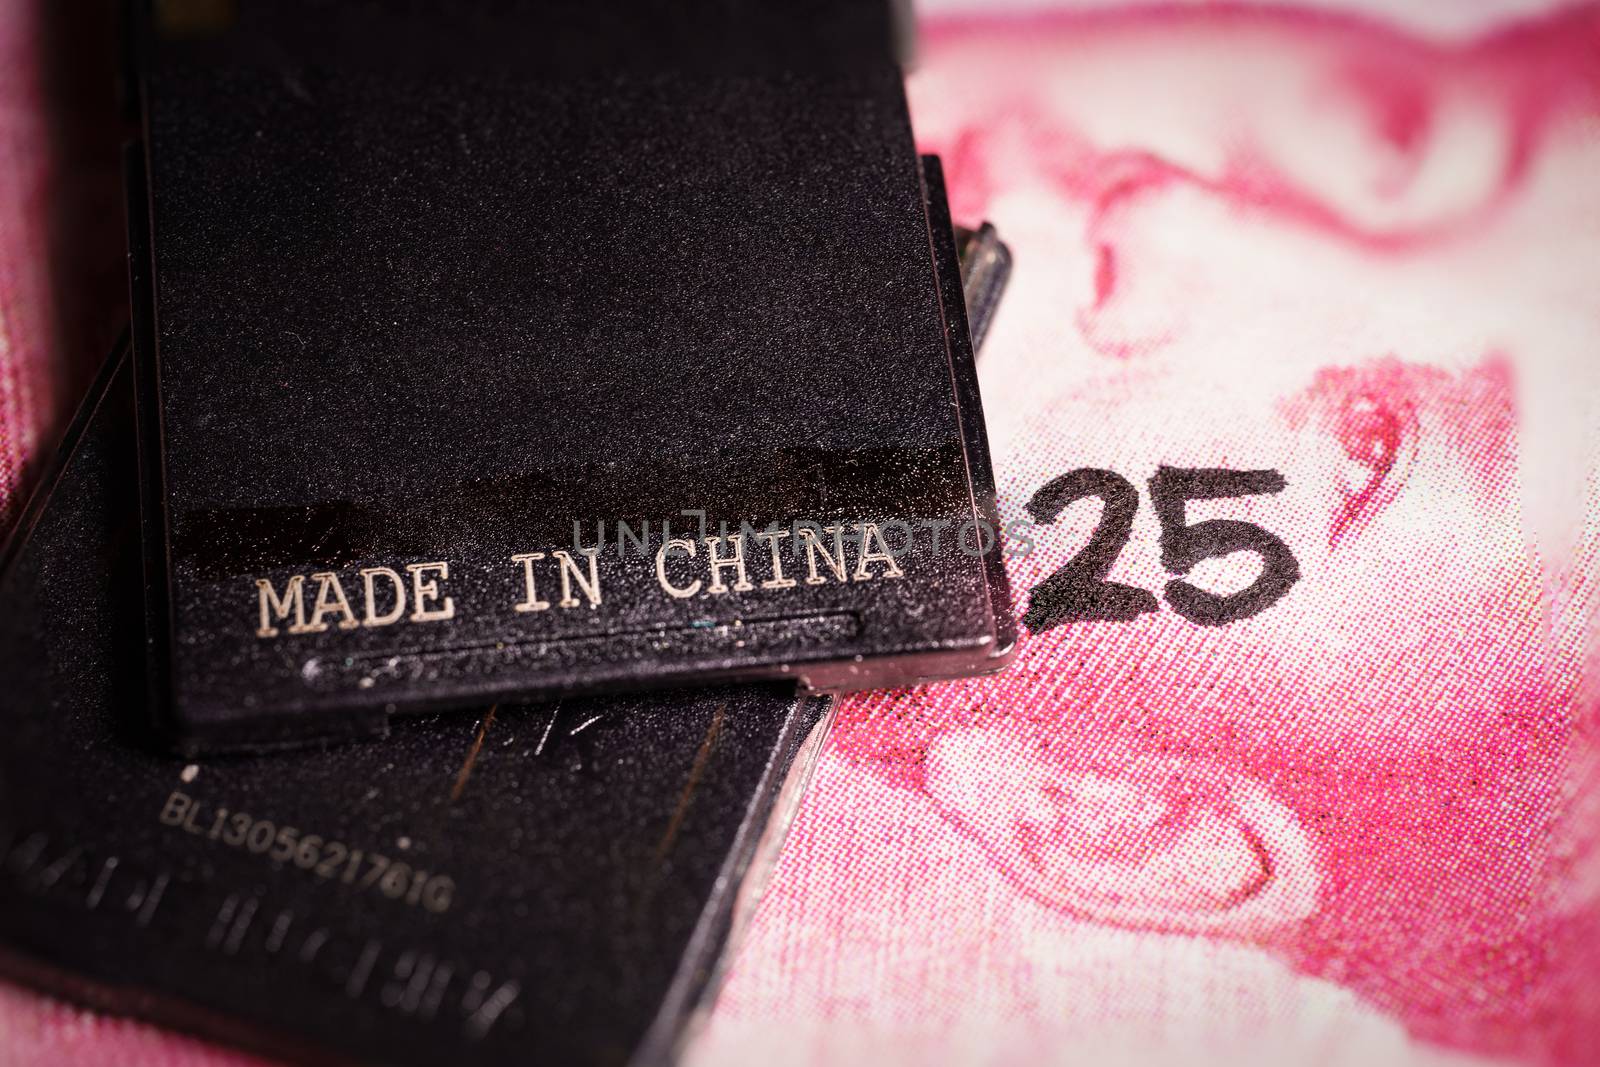 Made in china text written on a piece of plastic over a yuan bill. by tanaonte